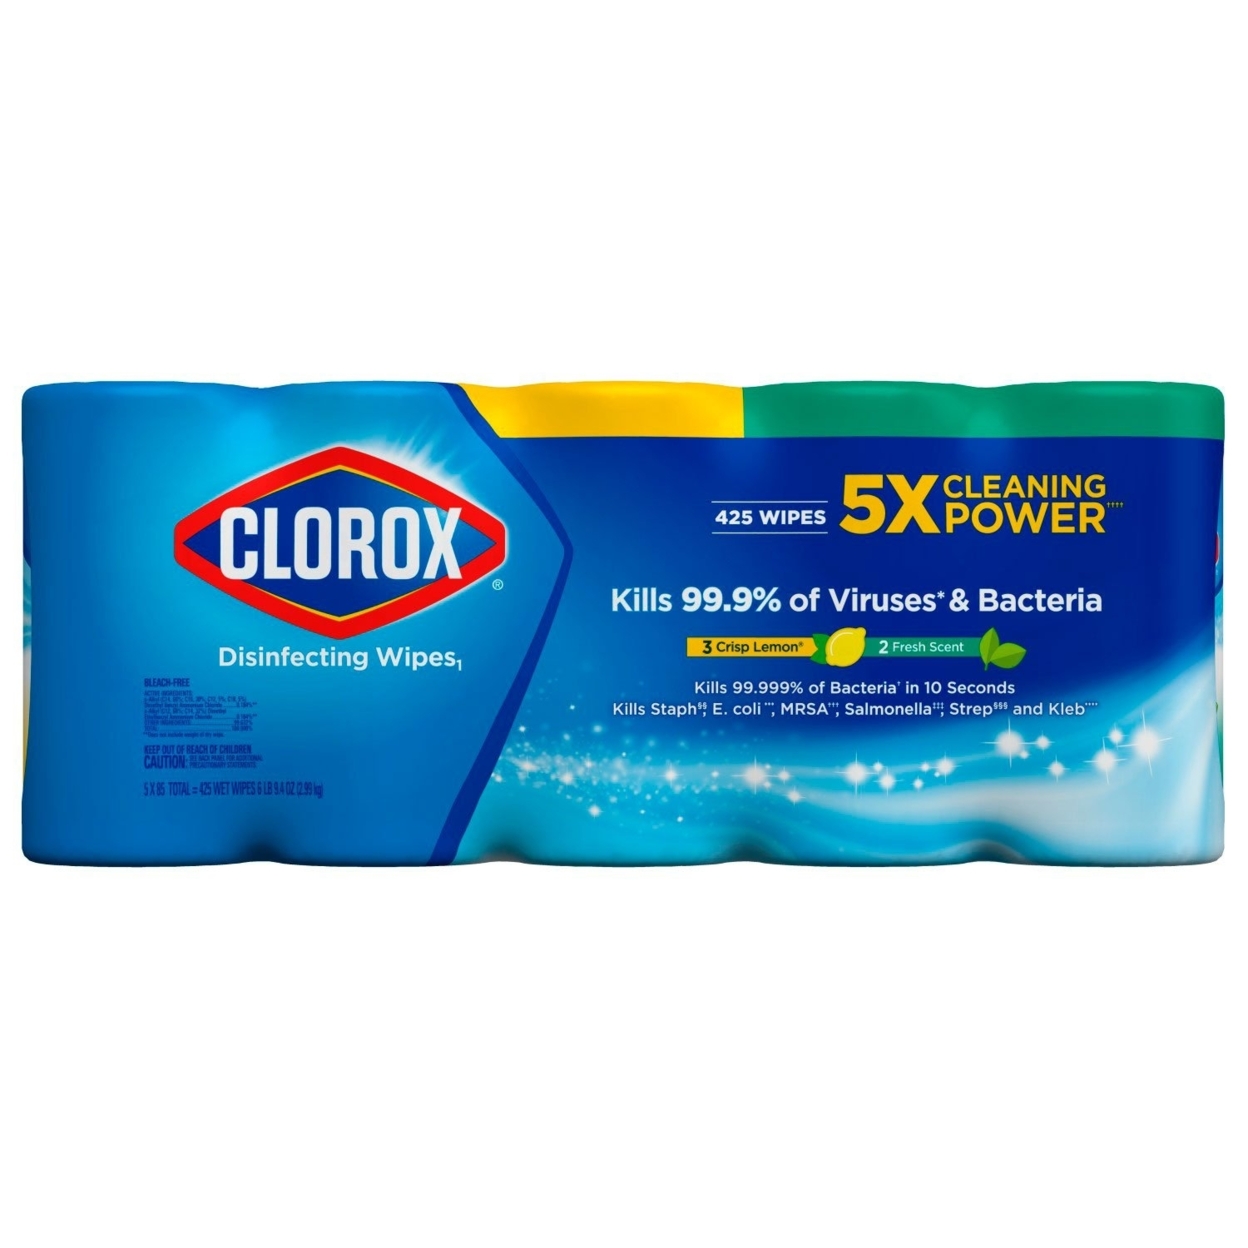 Clorox Disinfecting Wipes Value Pack, Bleach Free Cleaning Wipes, 85 Ct (5 Pack) - image 1 of 2